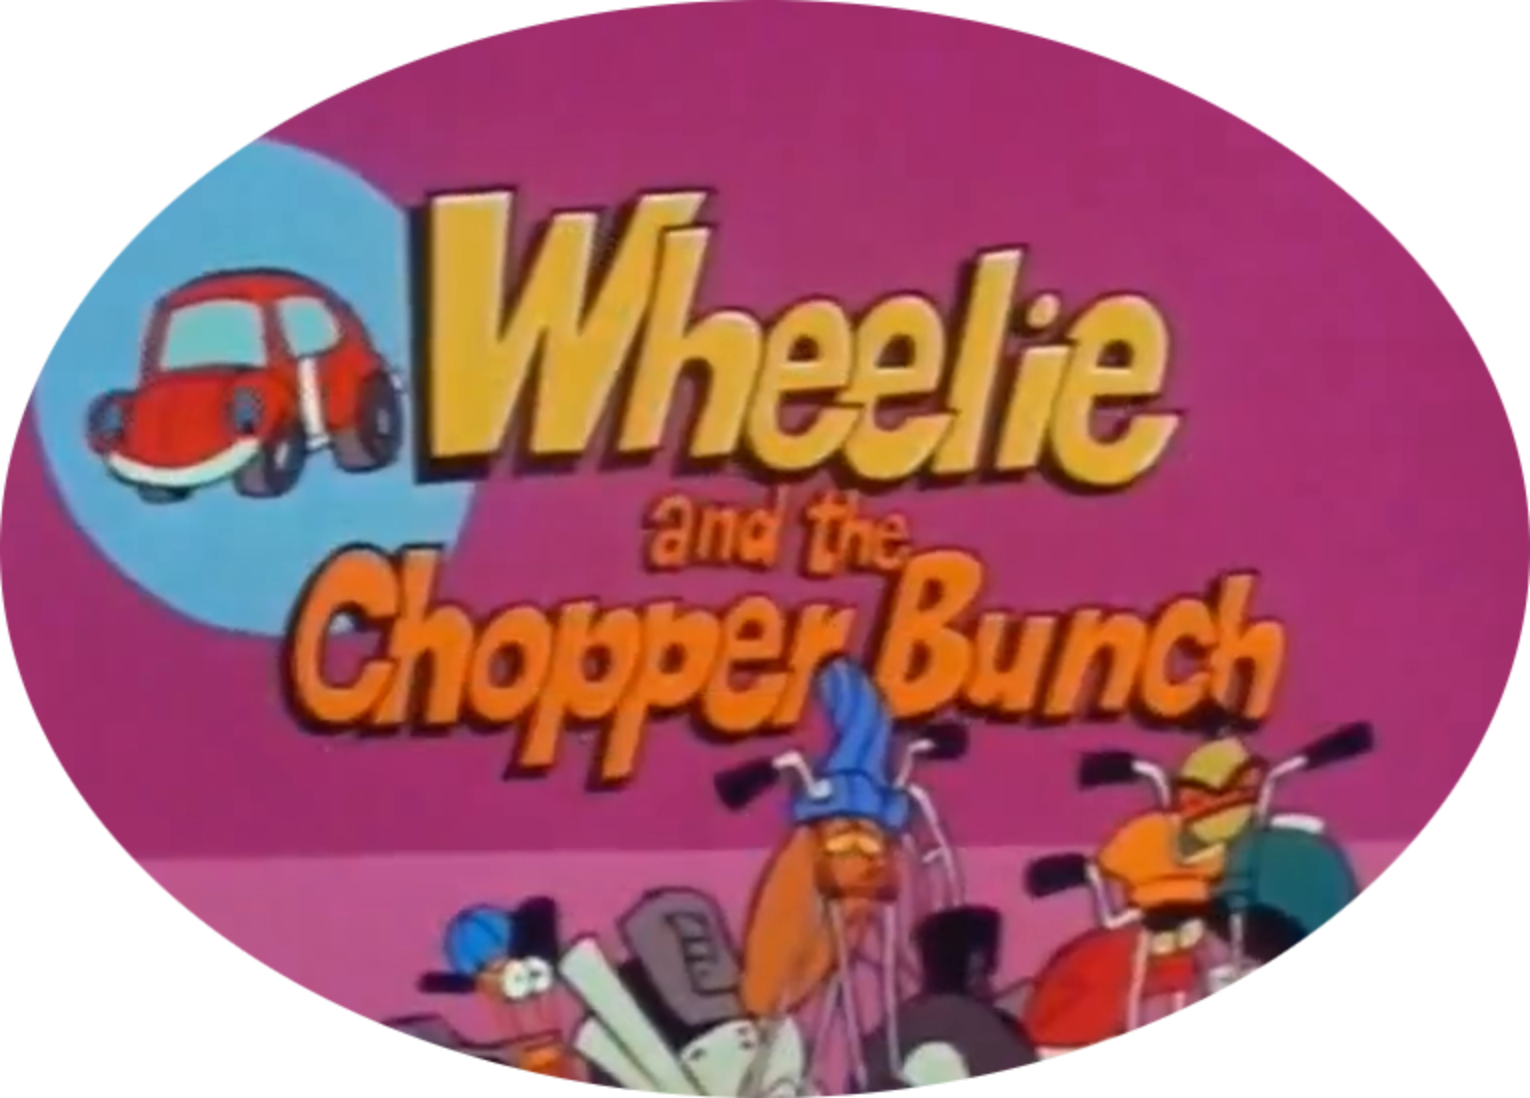 Wheelie and the Chopper Bunch Complete (1 DVD Box Set)